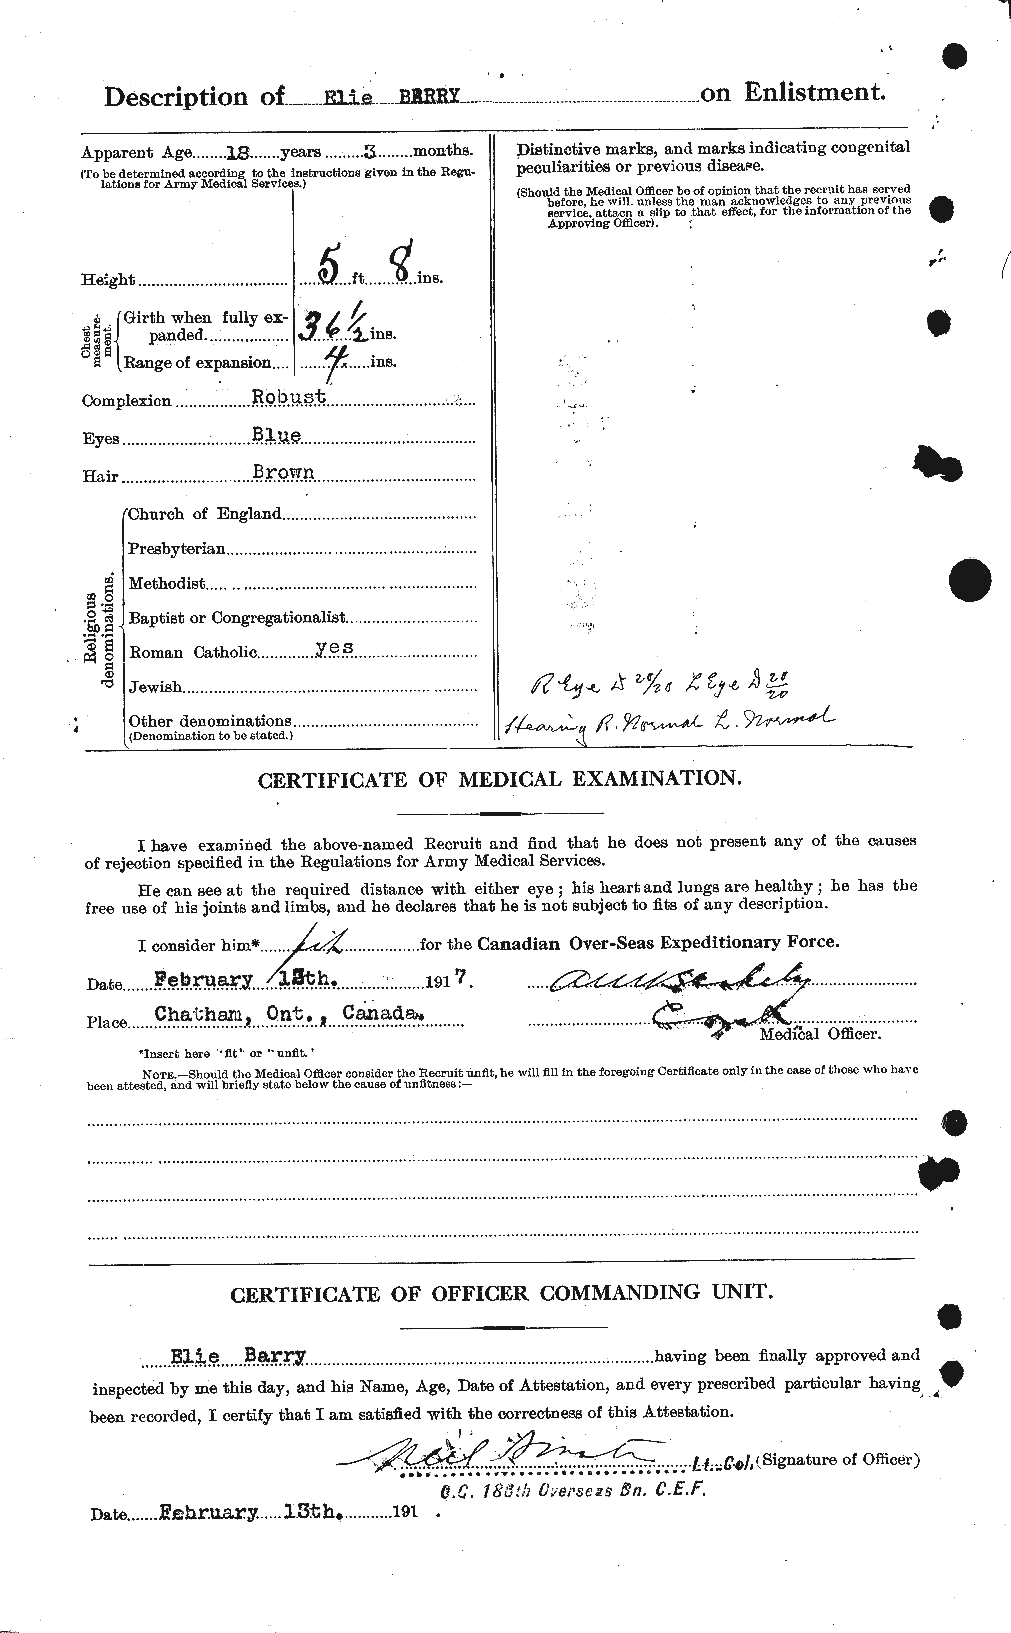 Personnel Records of the First World War - CEF 222195b